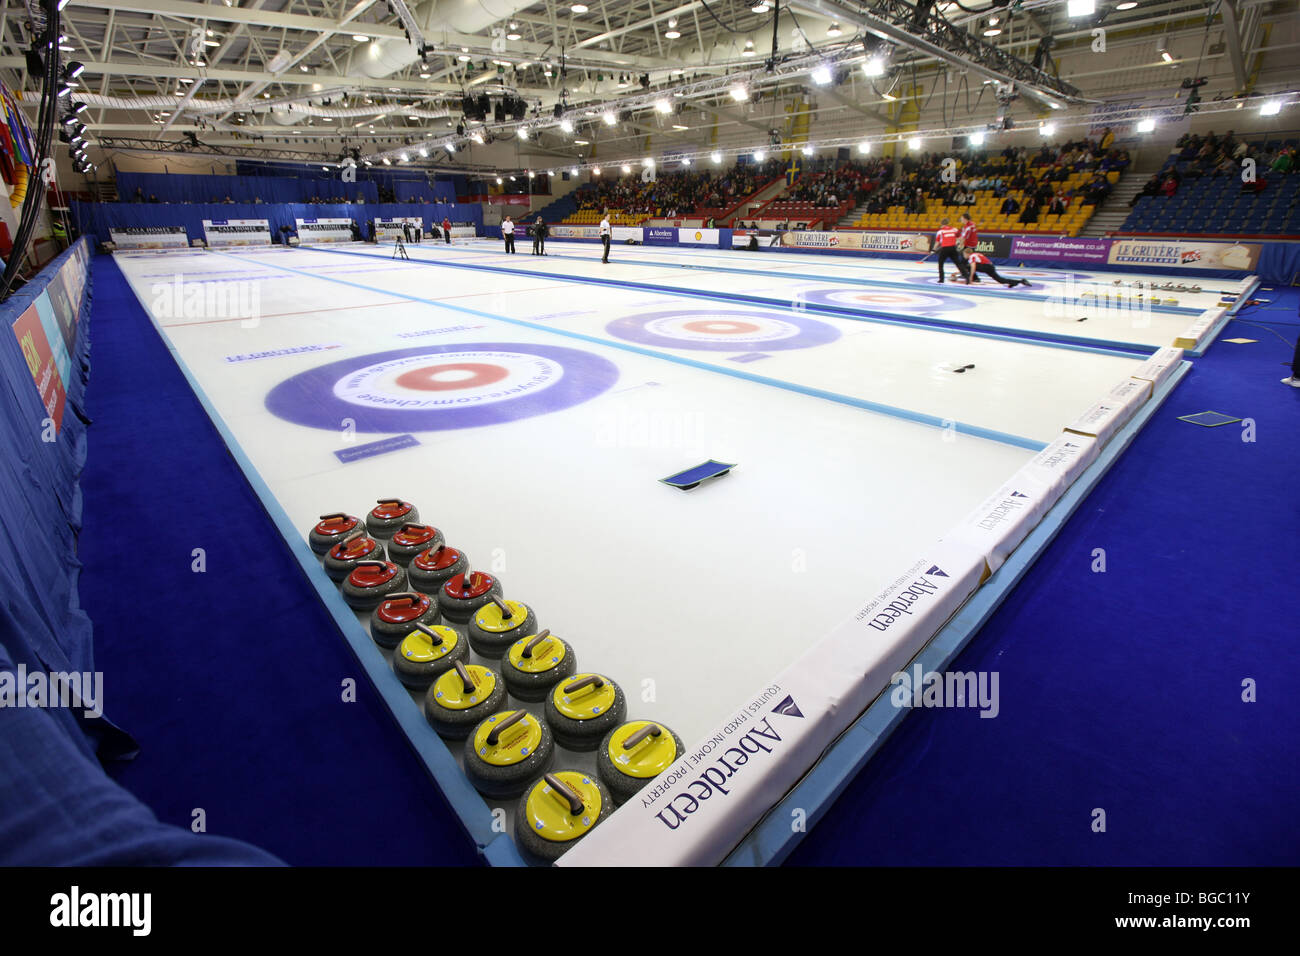 The Linx Ice Arena in Aberdeen, Scotland, UK, set up for a European curling competition on the ice. Stock Photo